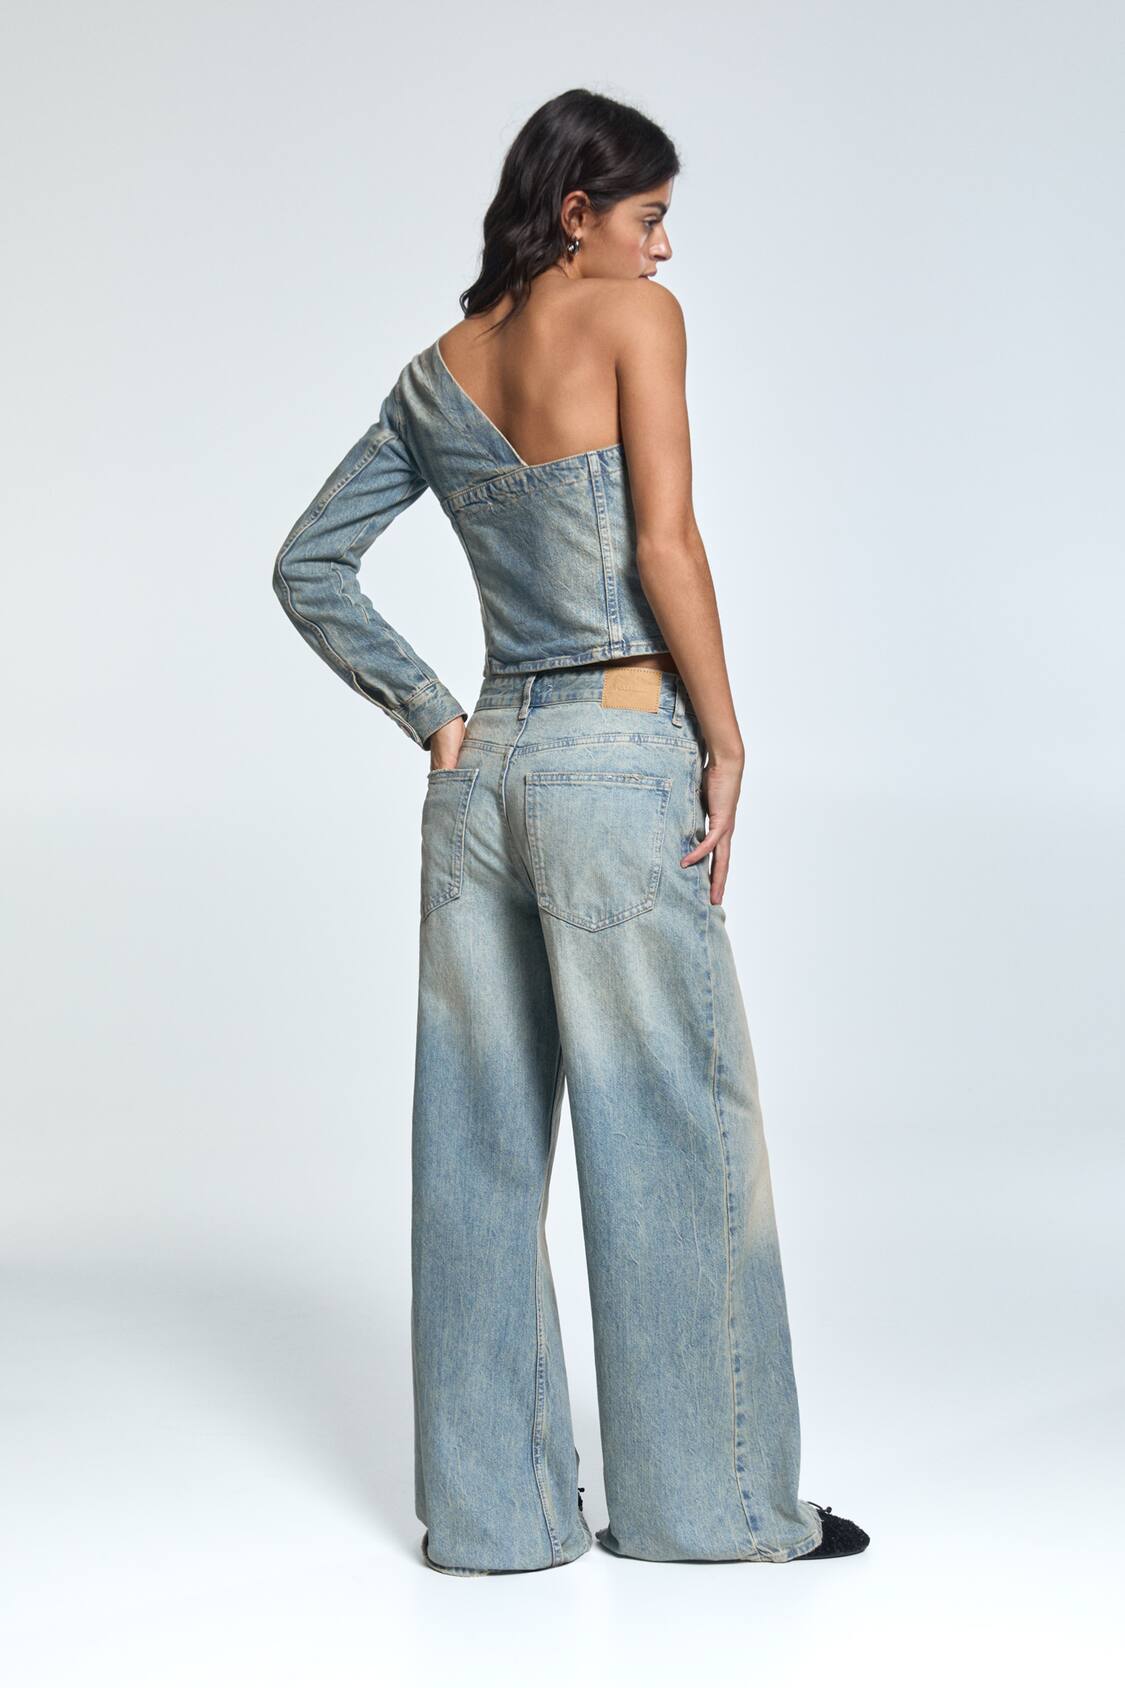  EXPOING Loose Jeans Wide Leg Denim Long Baggy Casual